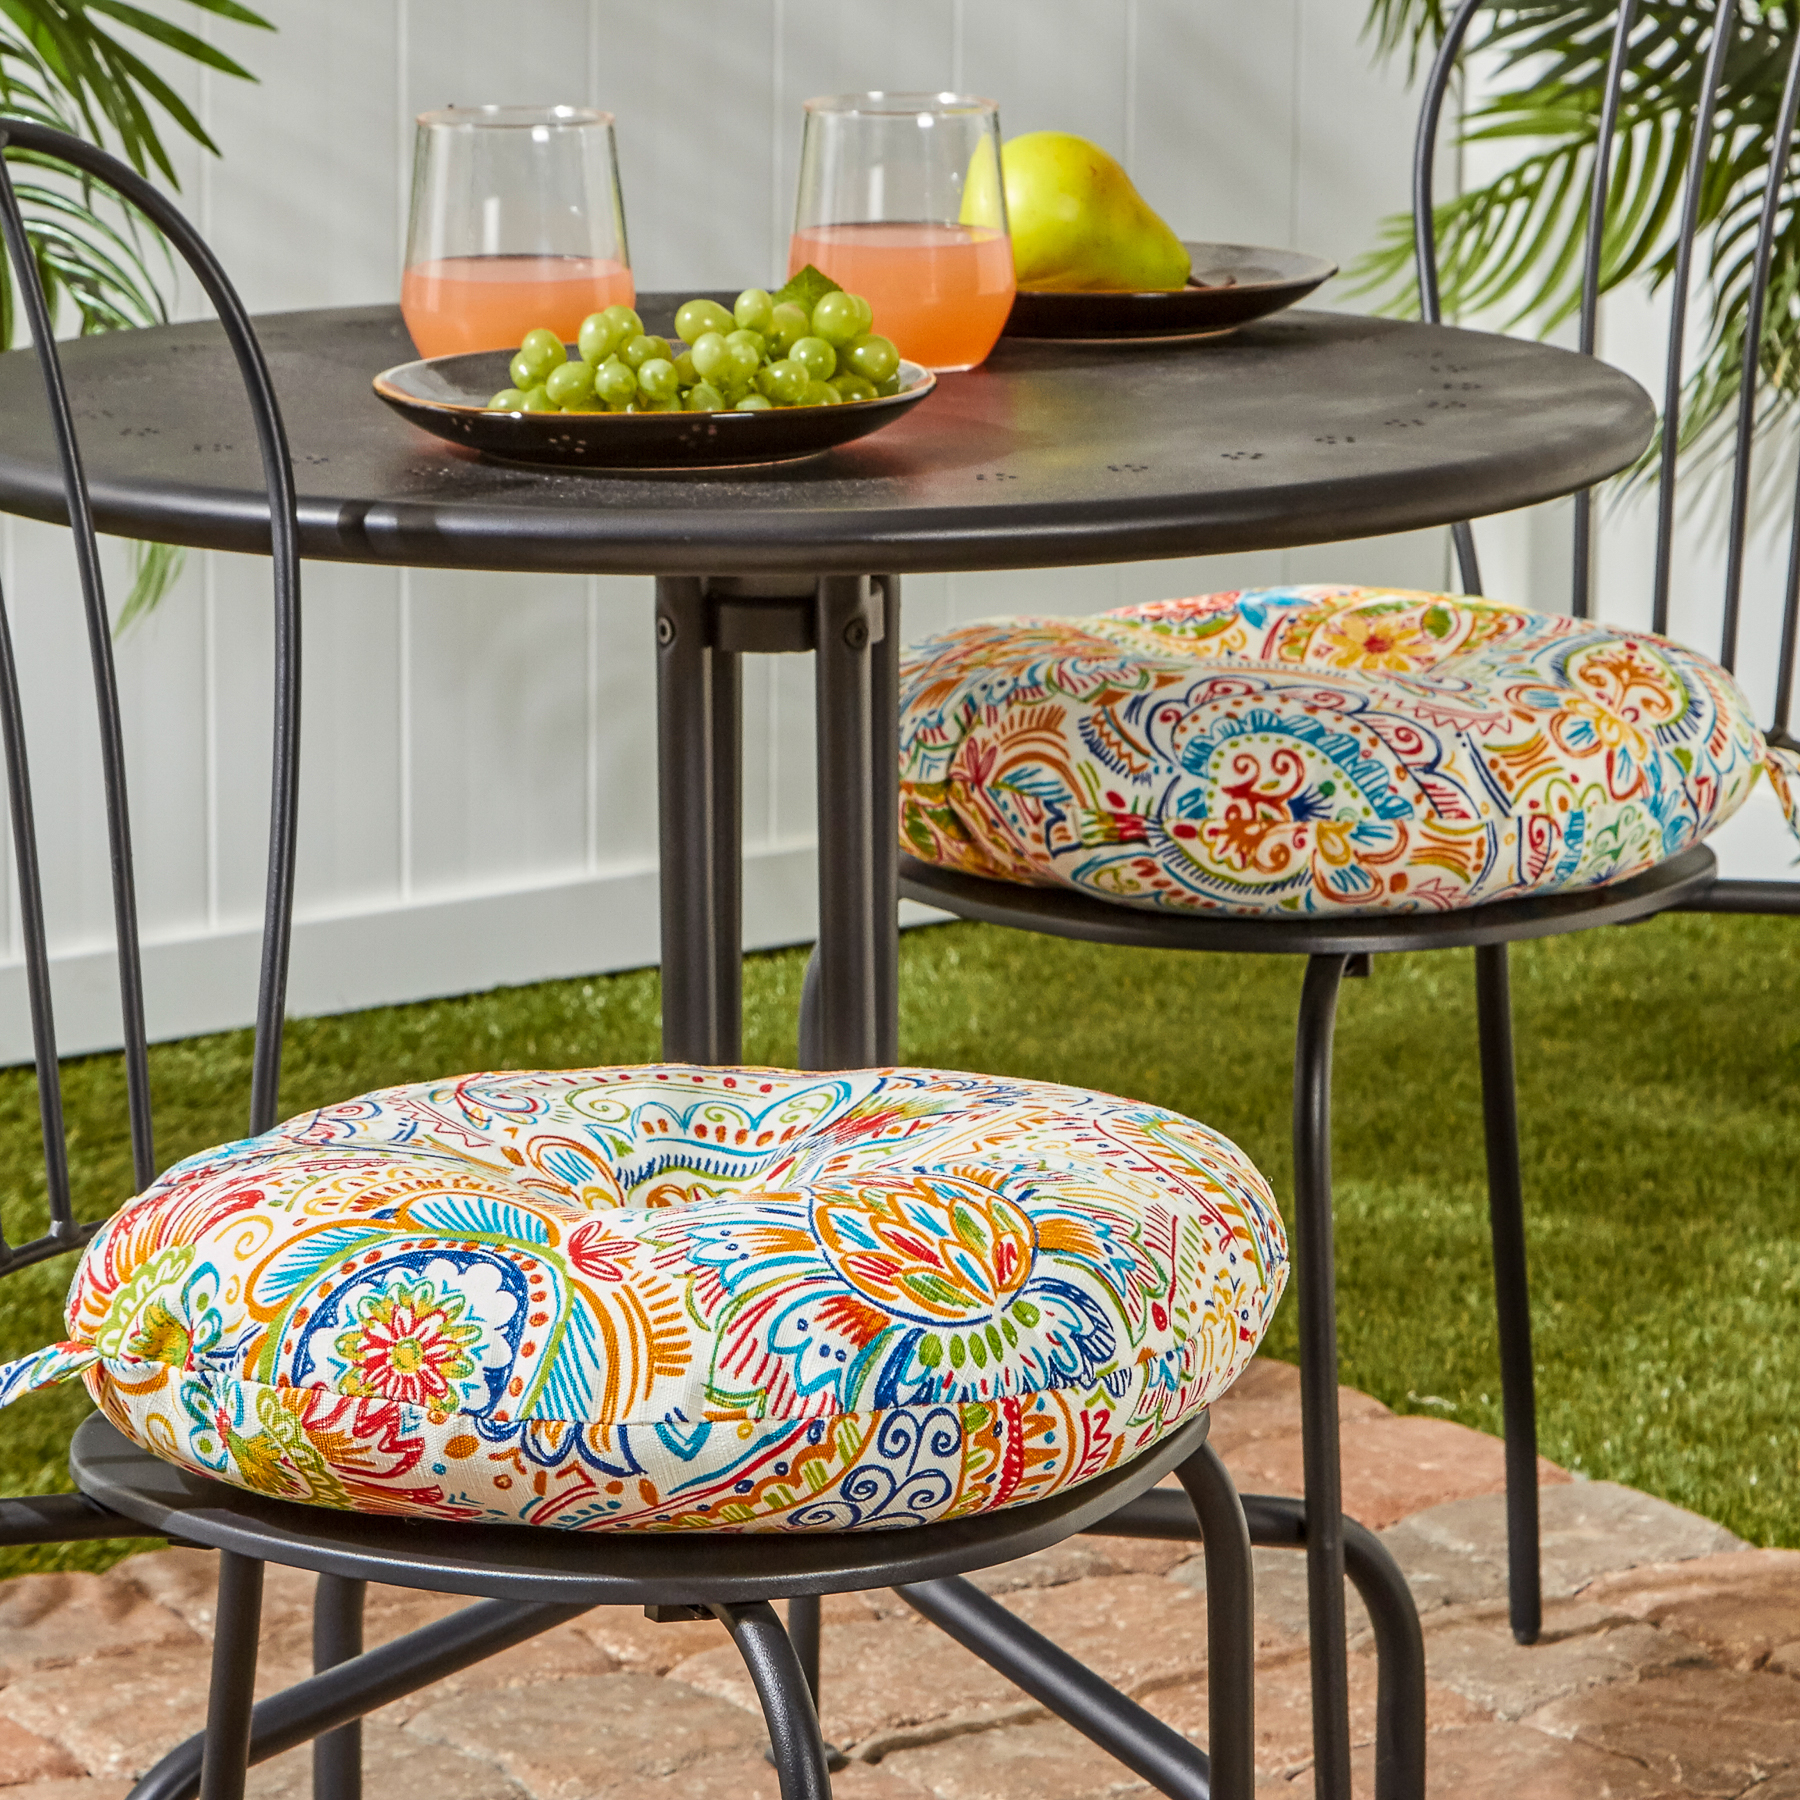 Greendale Home Fashions Jamboree Paisley 15 in. Round Outdoor Reversible Bistro Seat Cushion (Set of 2) - image 5 of 7